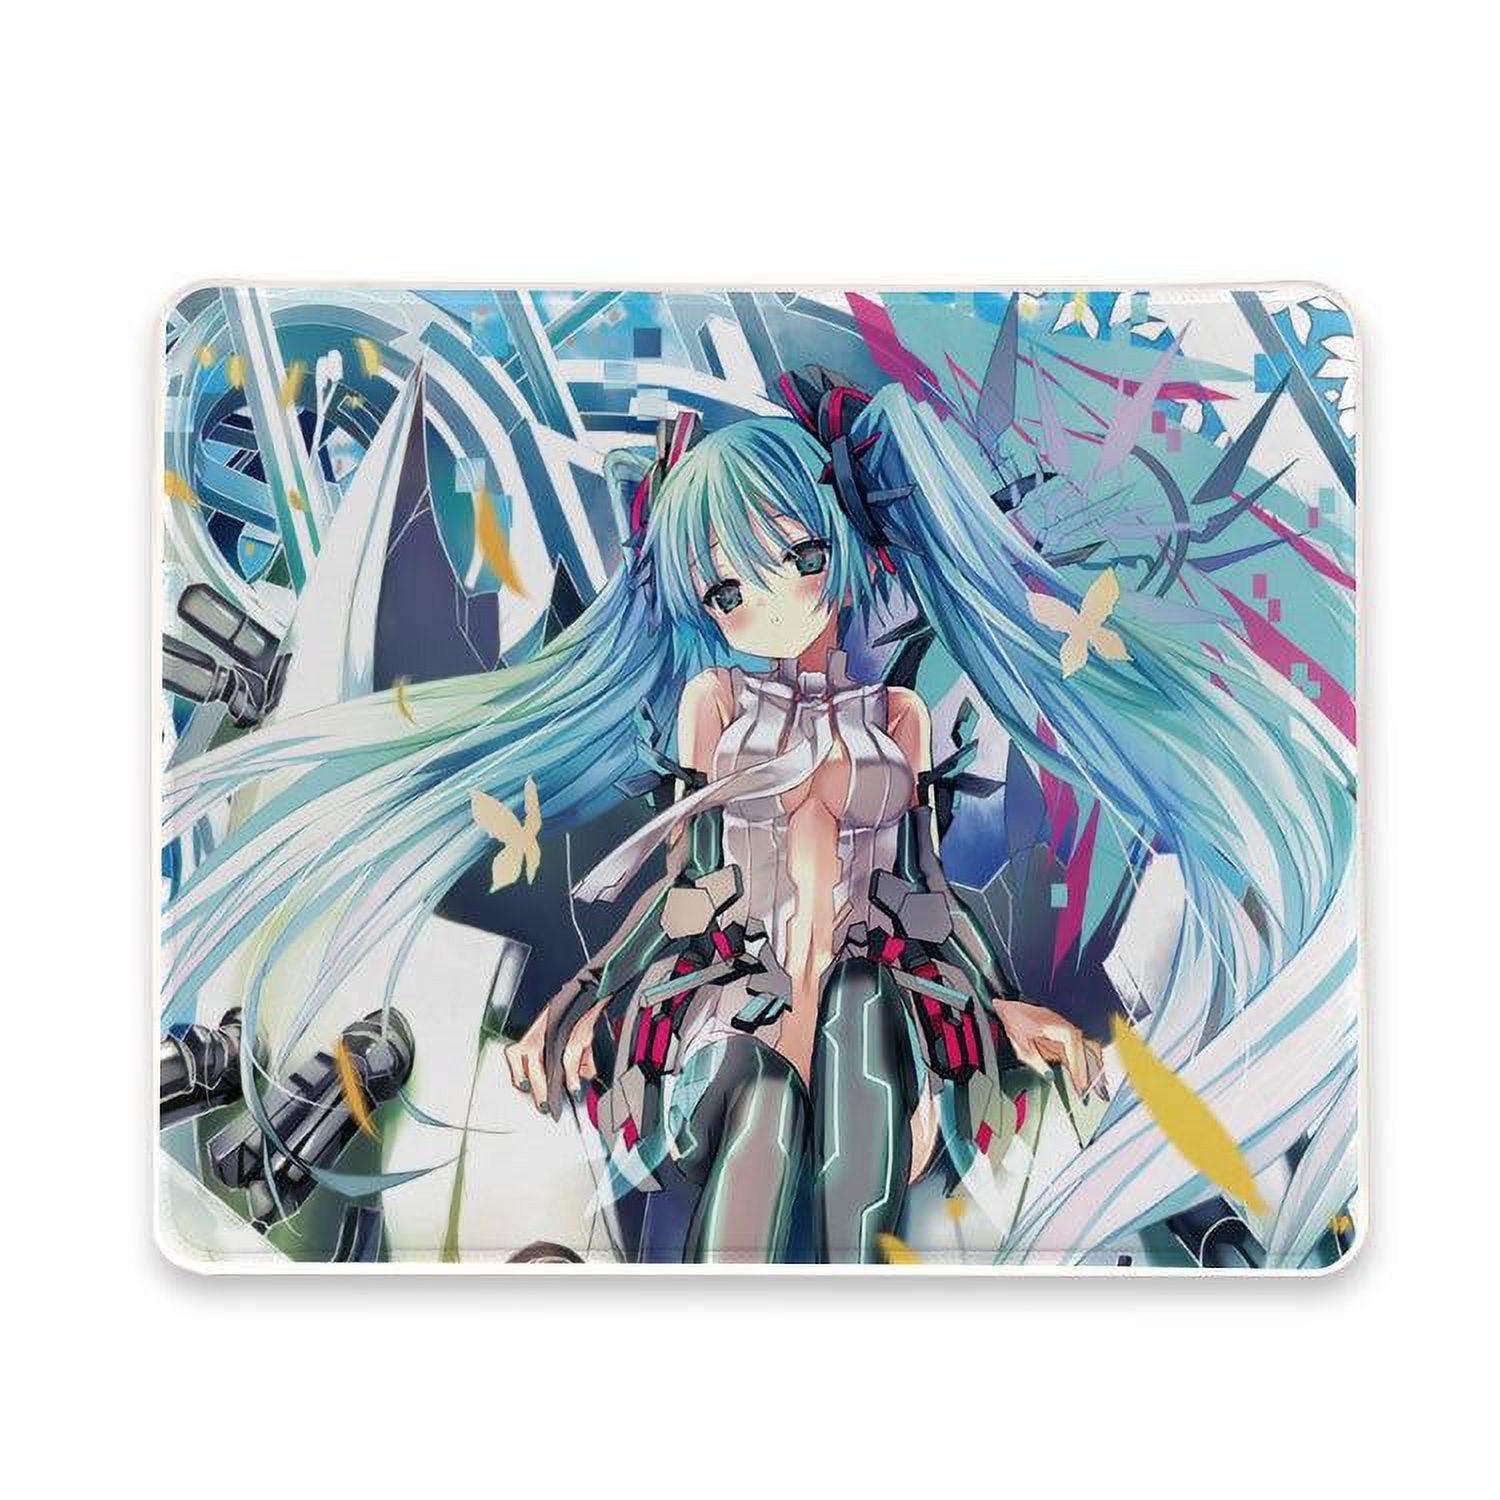 Non-Slip Mouse Pad for Home, Office, and Gaming Desk mousepad anti-slip mouse pad mat mice mousepad desktop mouse pad laptop mouse pad gaming mouse pad - image 4 of 7